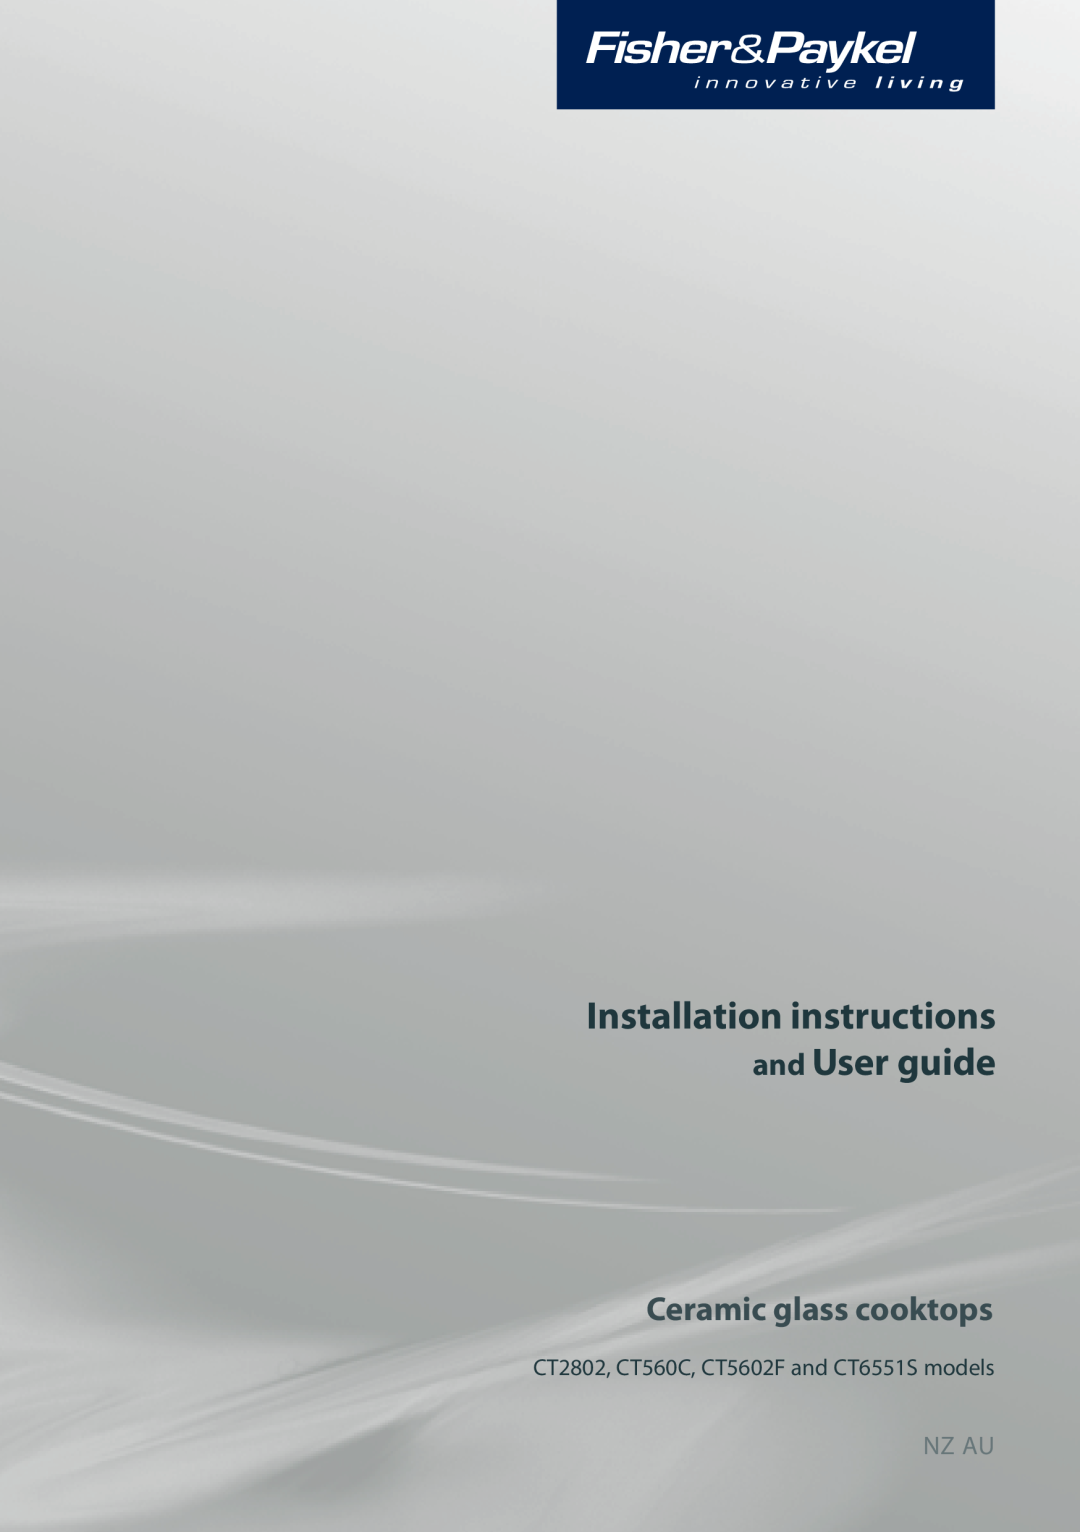 Fisher & Paykel CT6551S installation instructions Installation instructions and User guide, Ceramic glass cooktops, Nz Au 